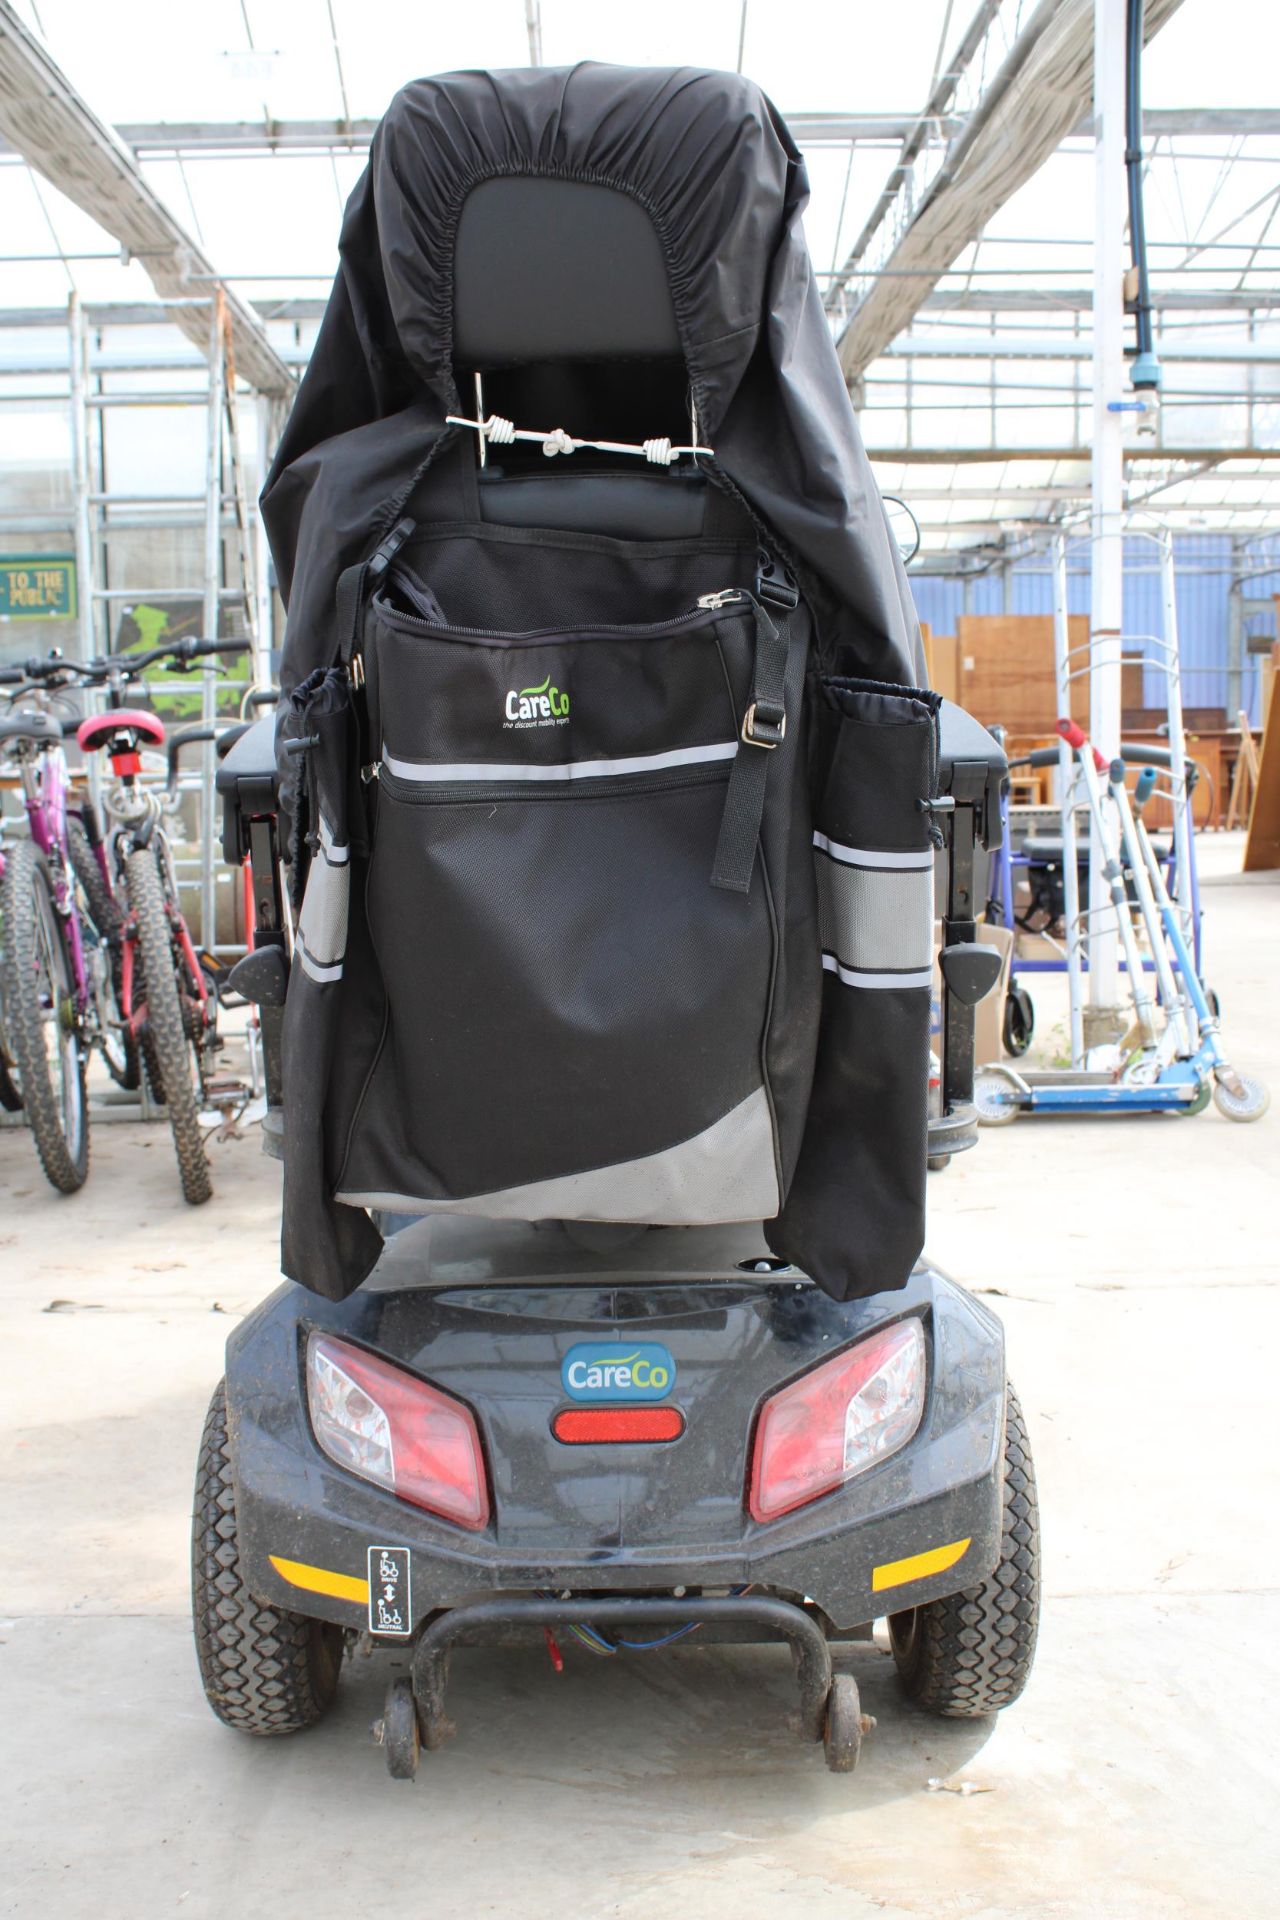 A FOUR WHEEL CARE CO ELECTRIC MOBILITY SCOOTER COMPLETE WITH CHARGER - Image 6 of 7